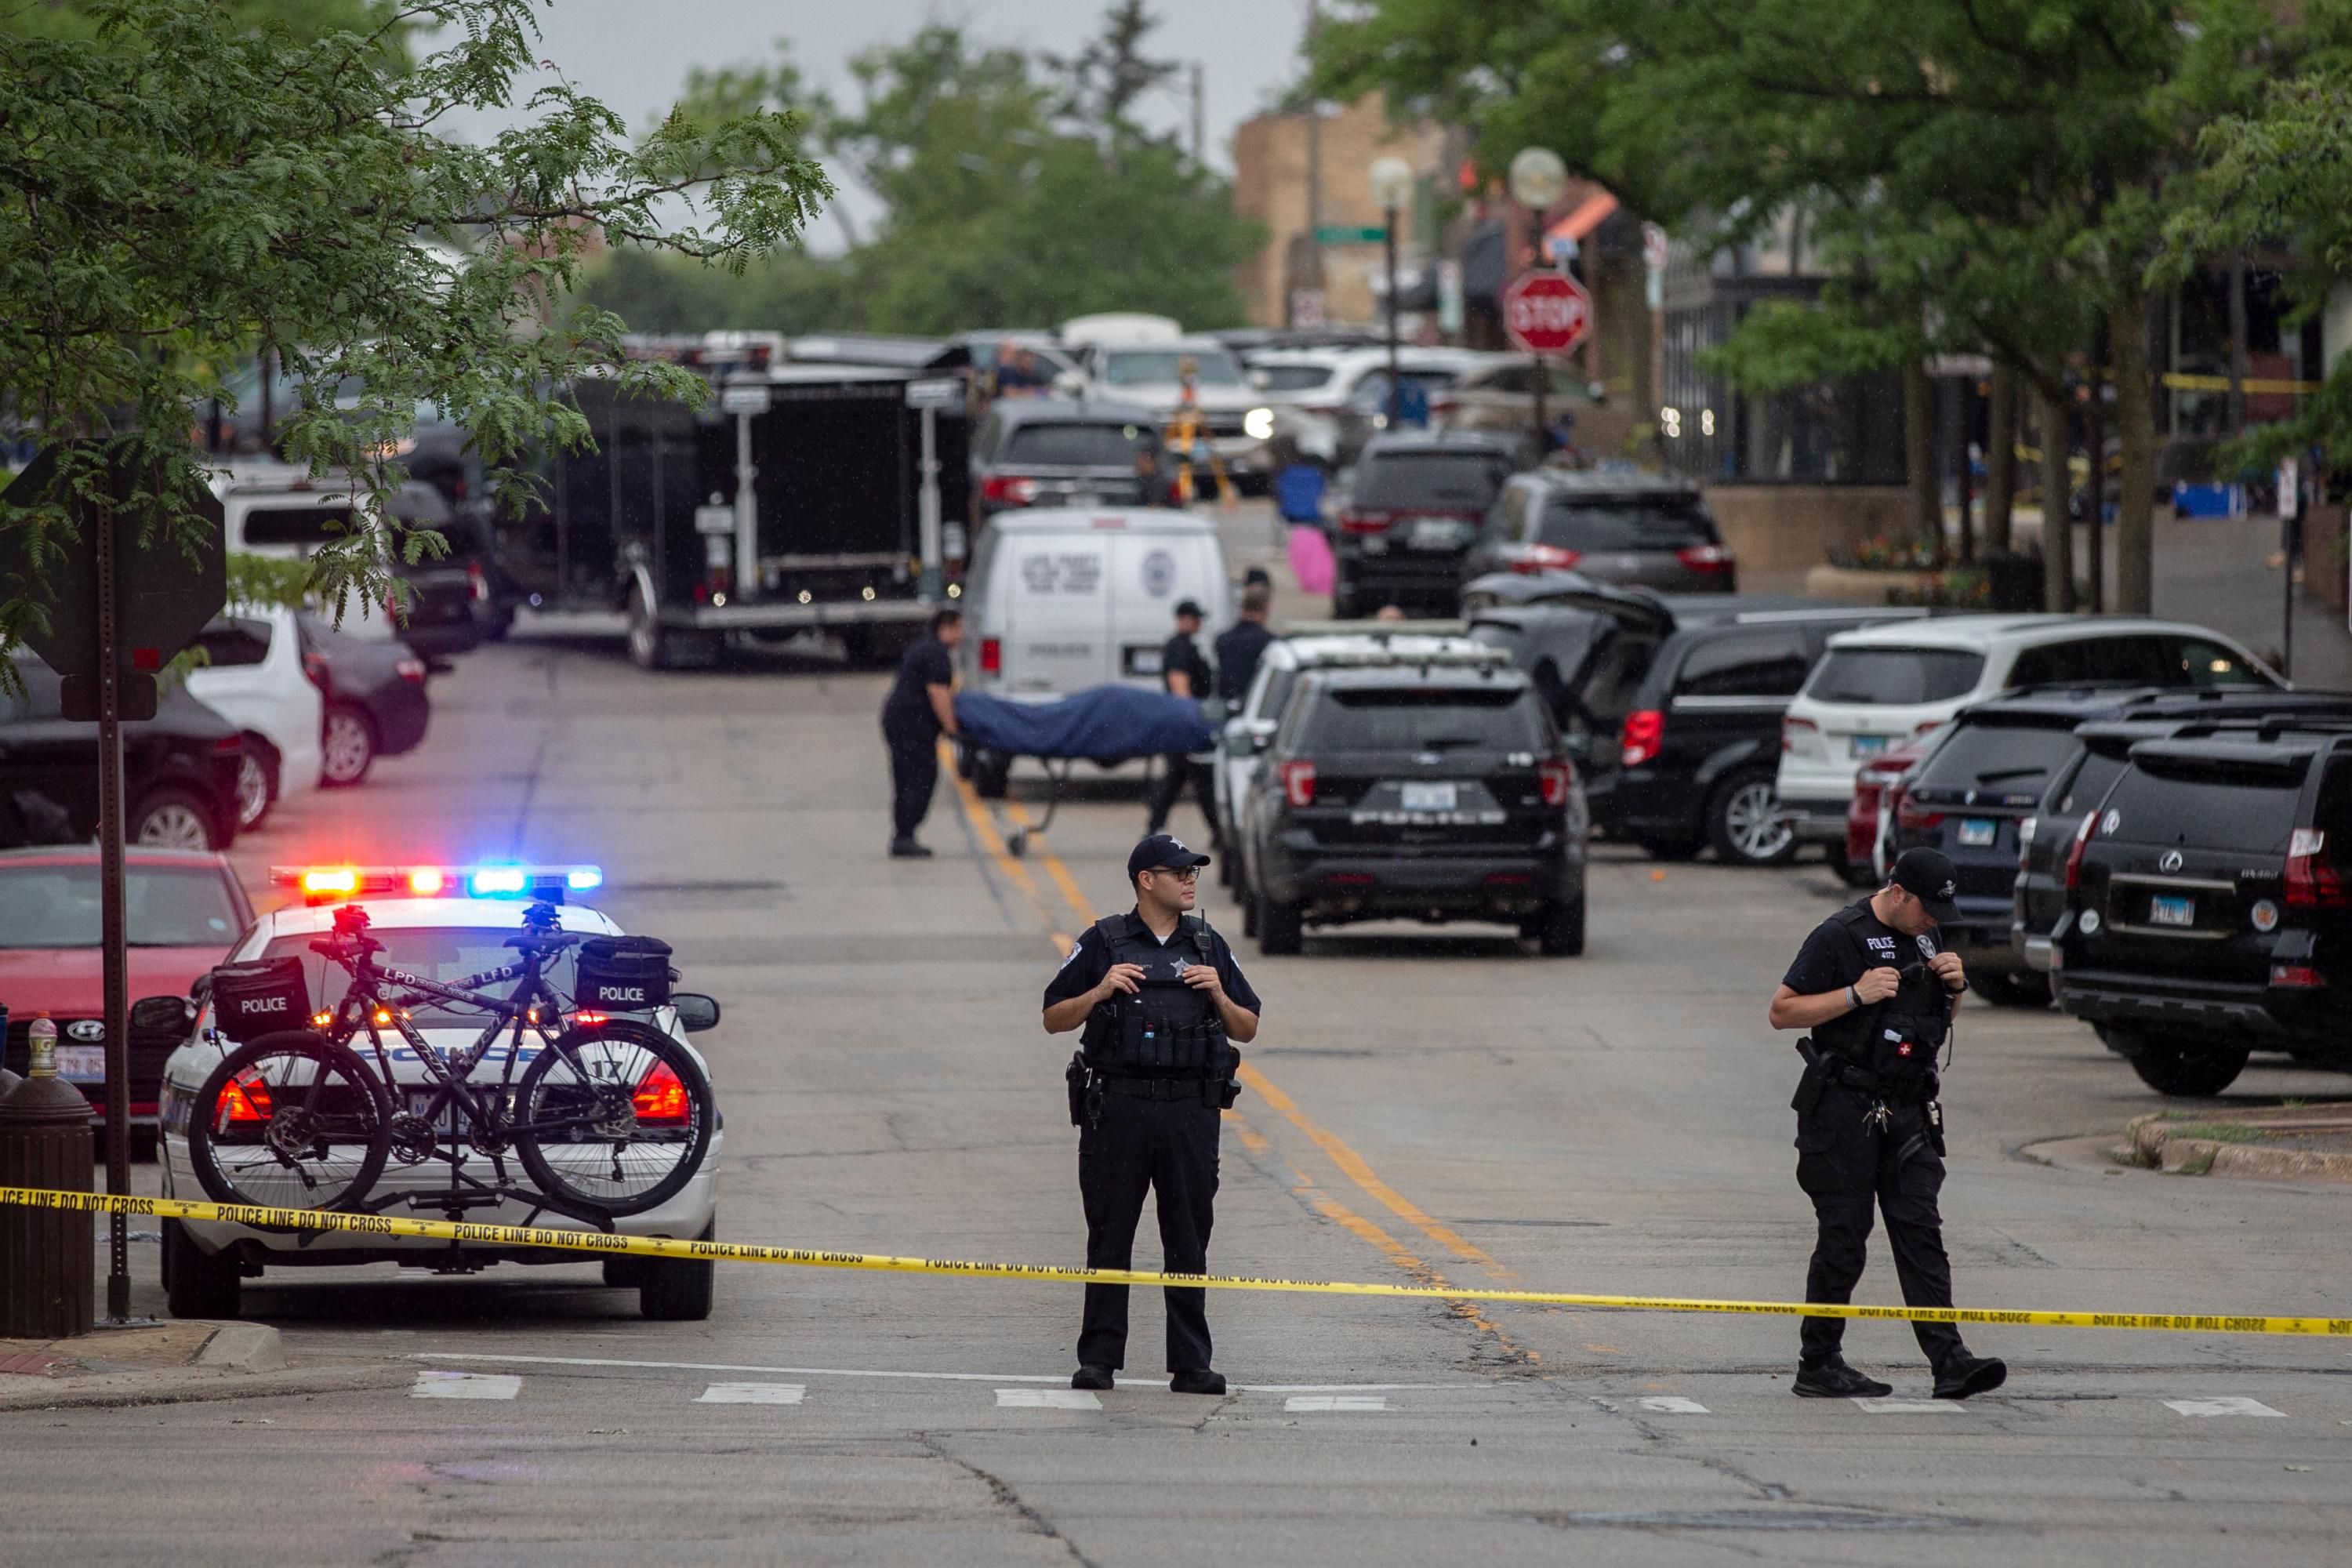 Aftermath of Highland Park shooting